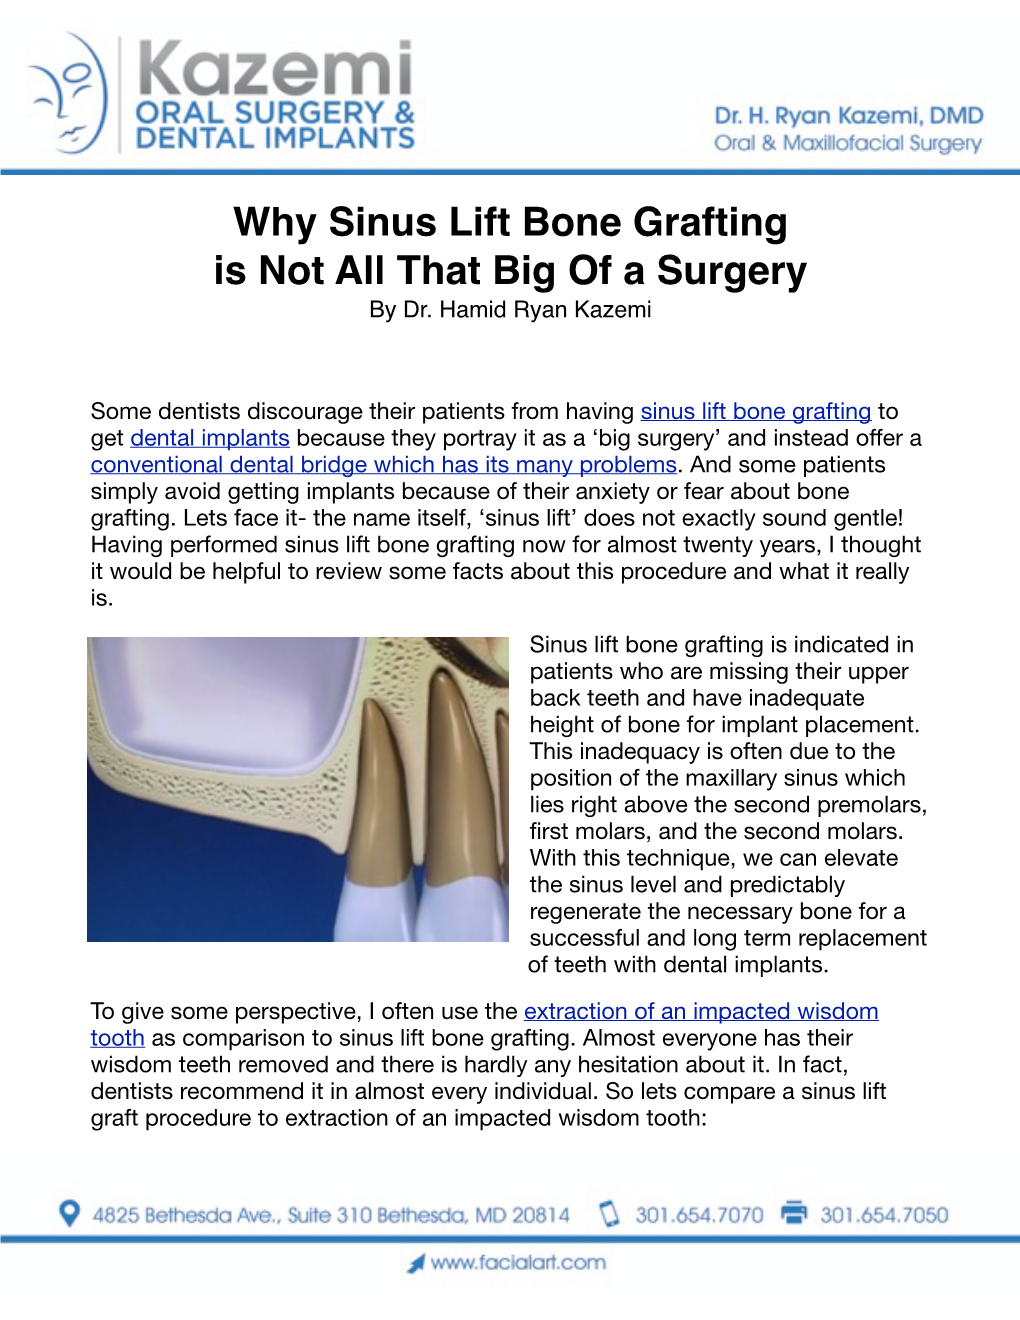 Why Sinus Lift Bone Grafting Is Not All That Big of a Surgery by Dr